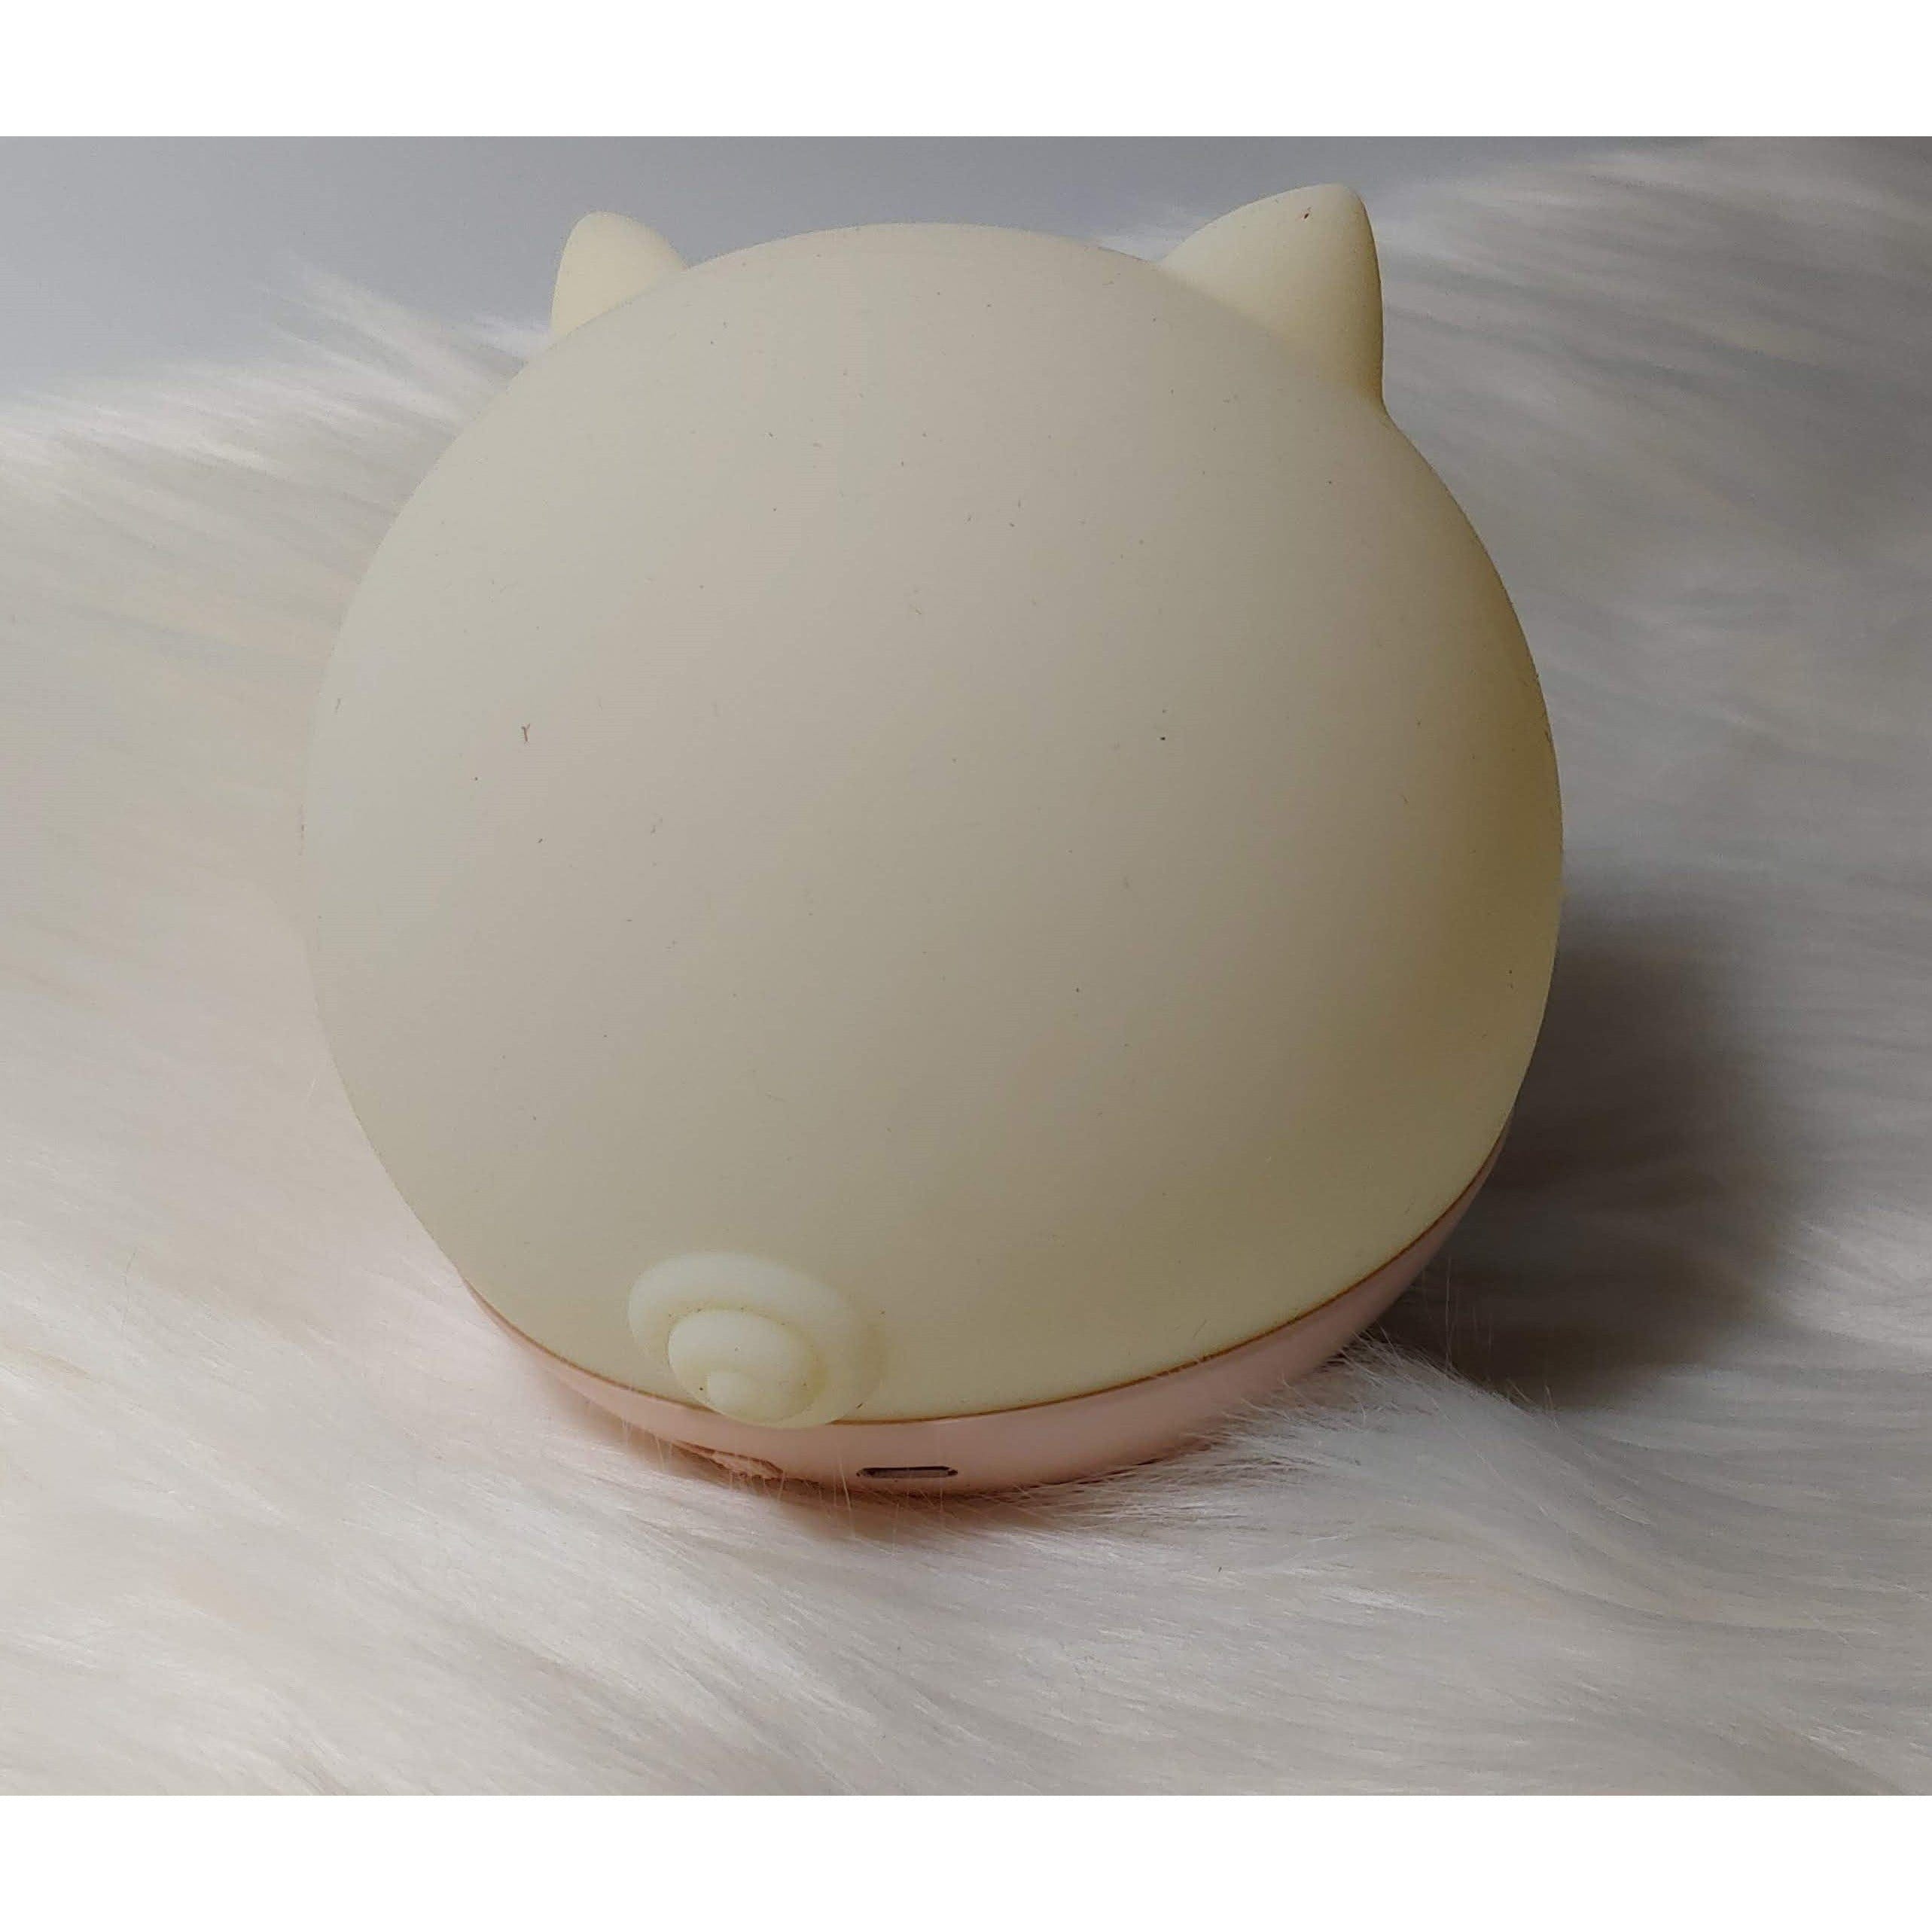 Pig Night Light, Cutest Little Piggy Light to Brighten the Darkness Just a Little - The Pink Pigs, Animal Lover's Boutique